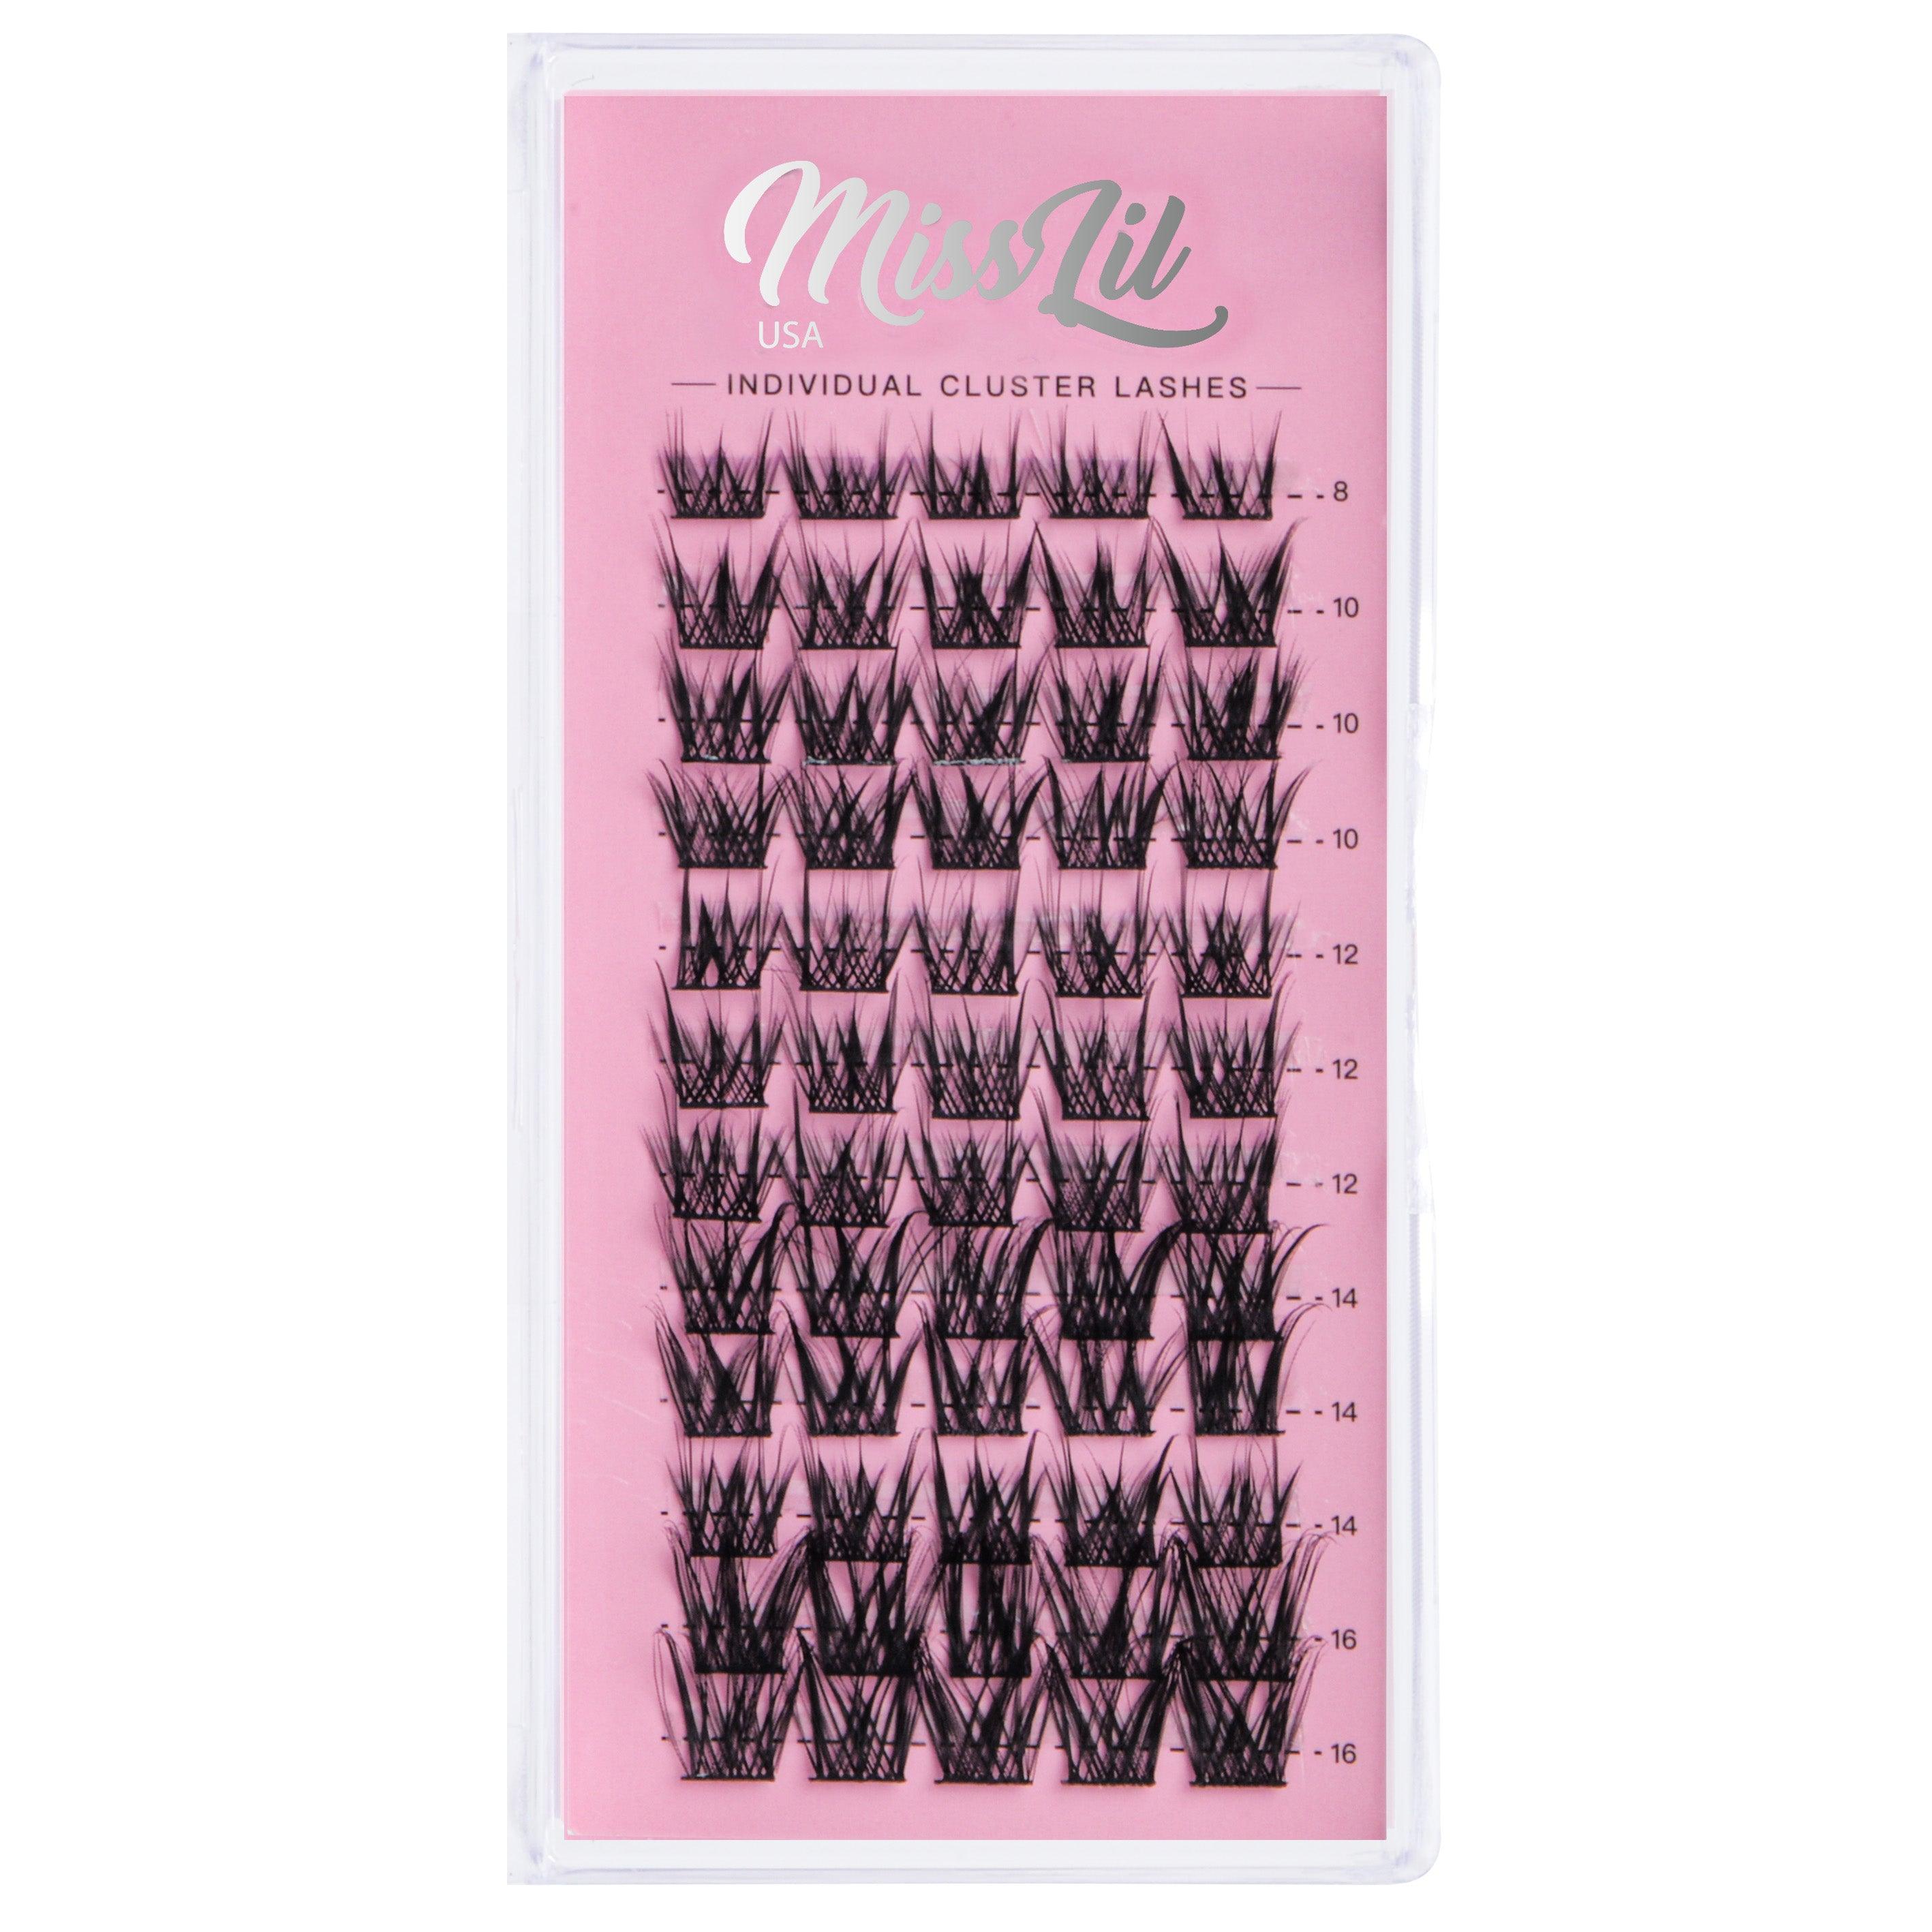 DIY Individual Cluster lashes AD-39 MIX Tray - Miss Lil USA